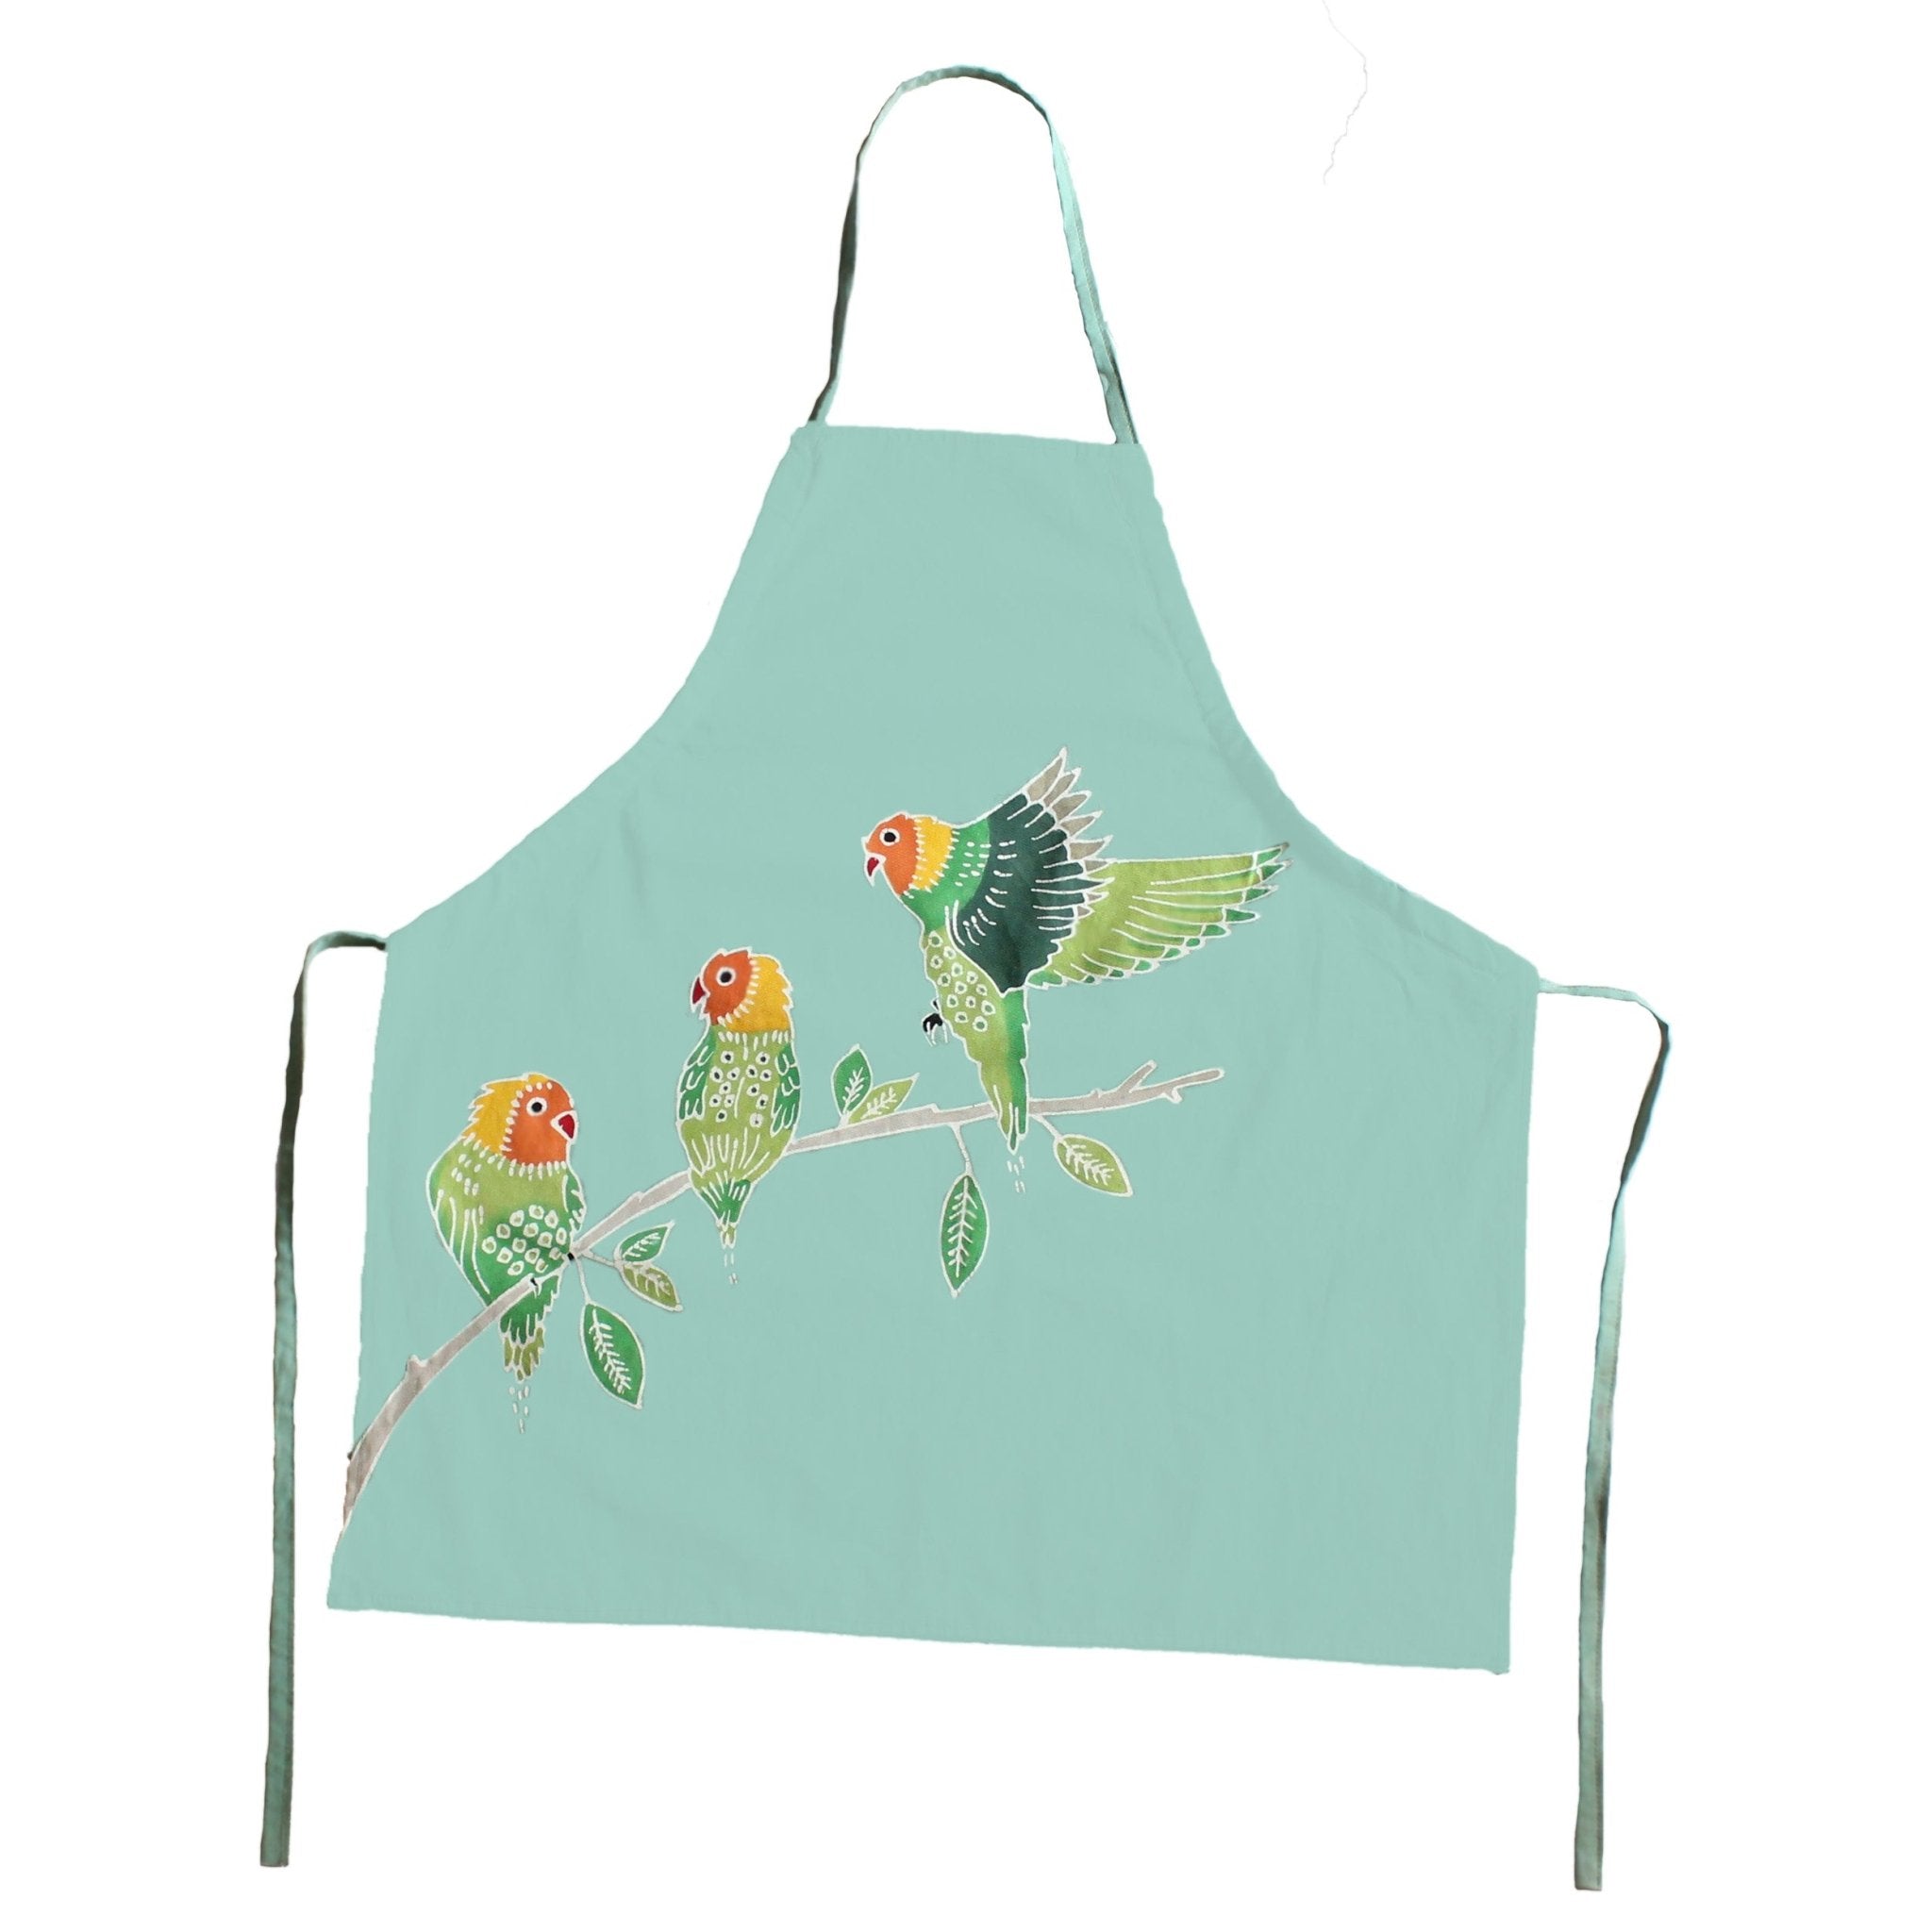 Papiko Lovebird Apron - Handmade by TRIBAL TEXTILES - Handcrafted Home Decor Interiors - African Made